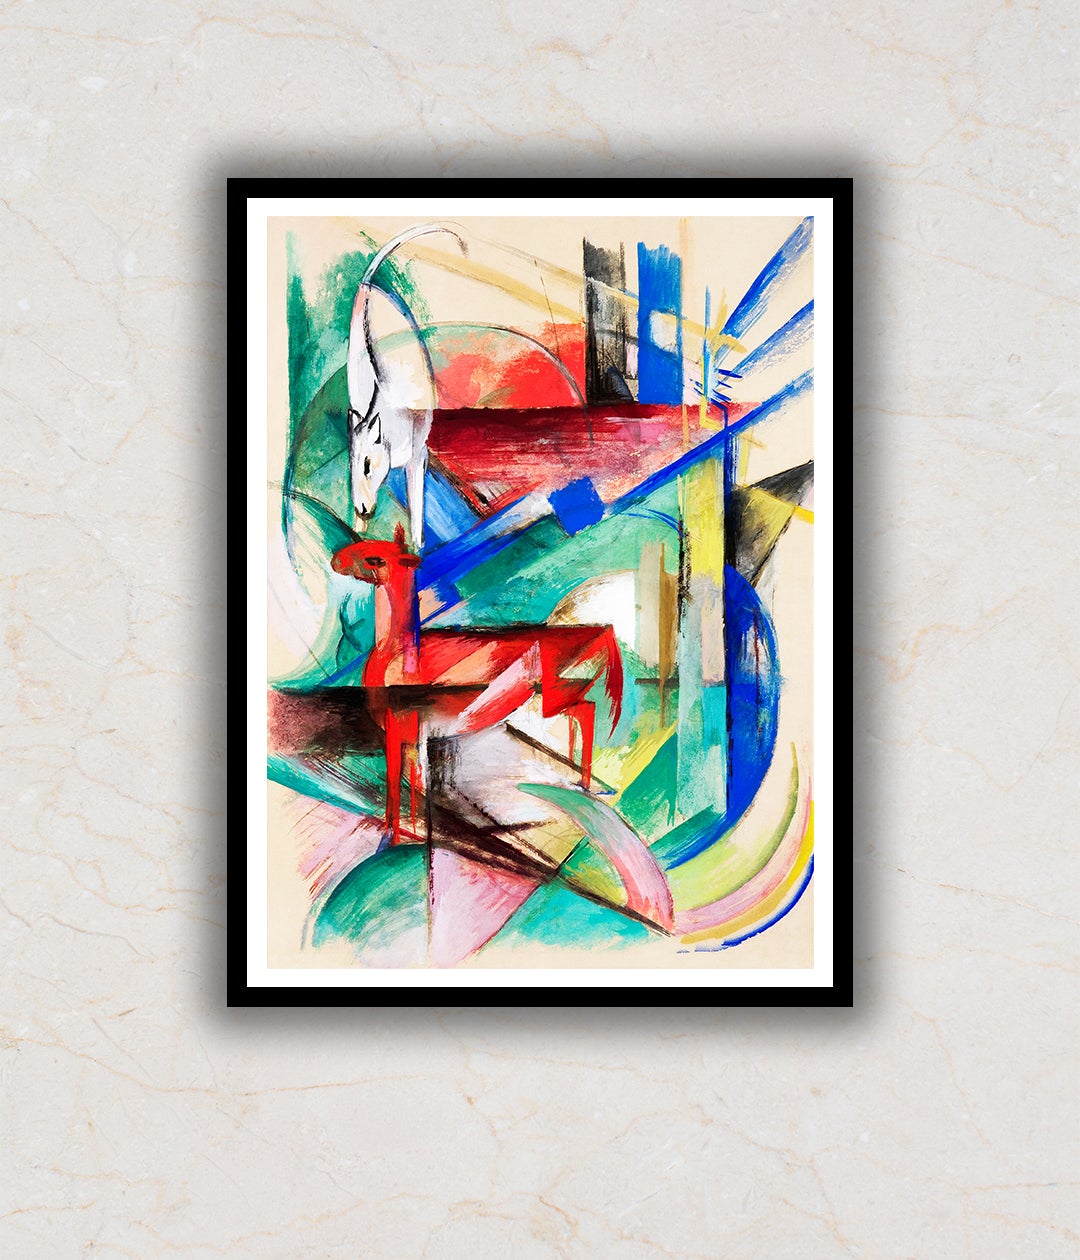 Composition of Animals Modern Abstract Painting Artwork For Home Wall DŽcor